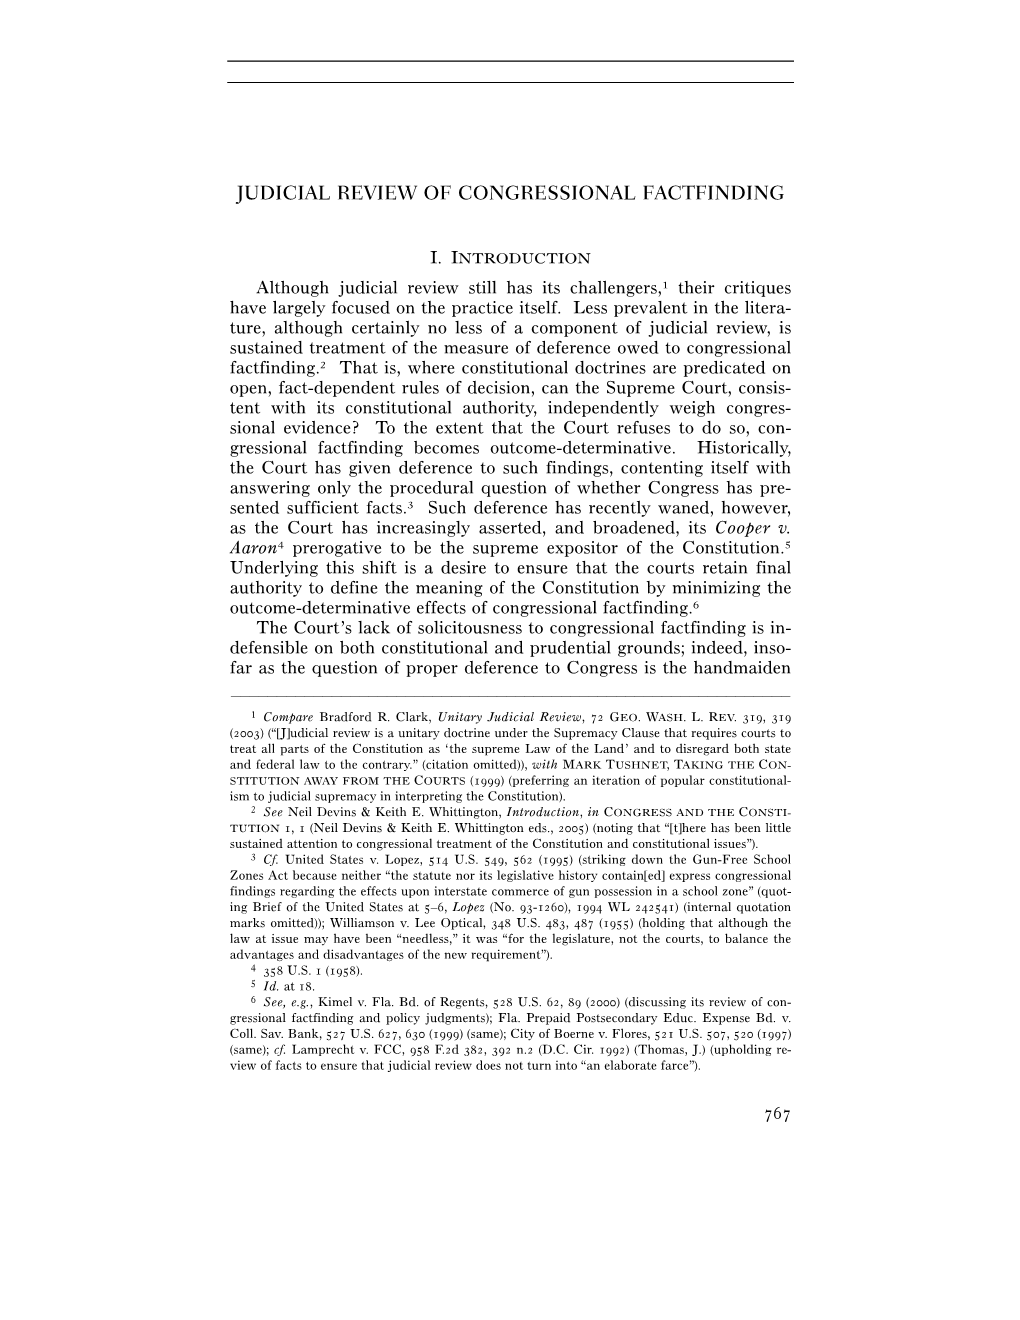 Judicial Review of Congressional Factfinding